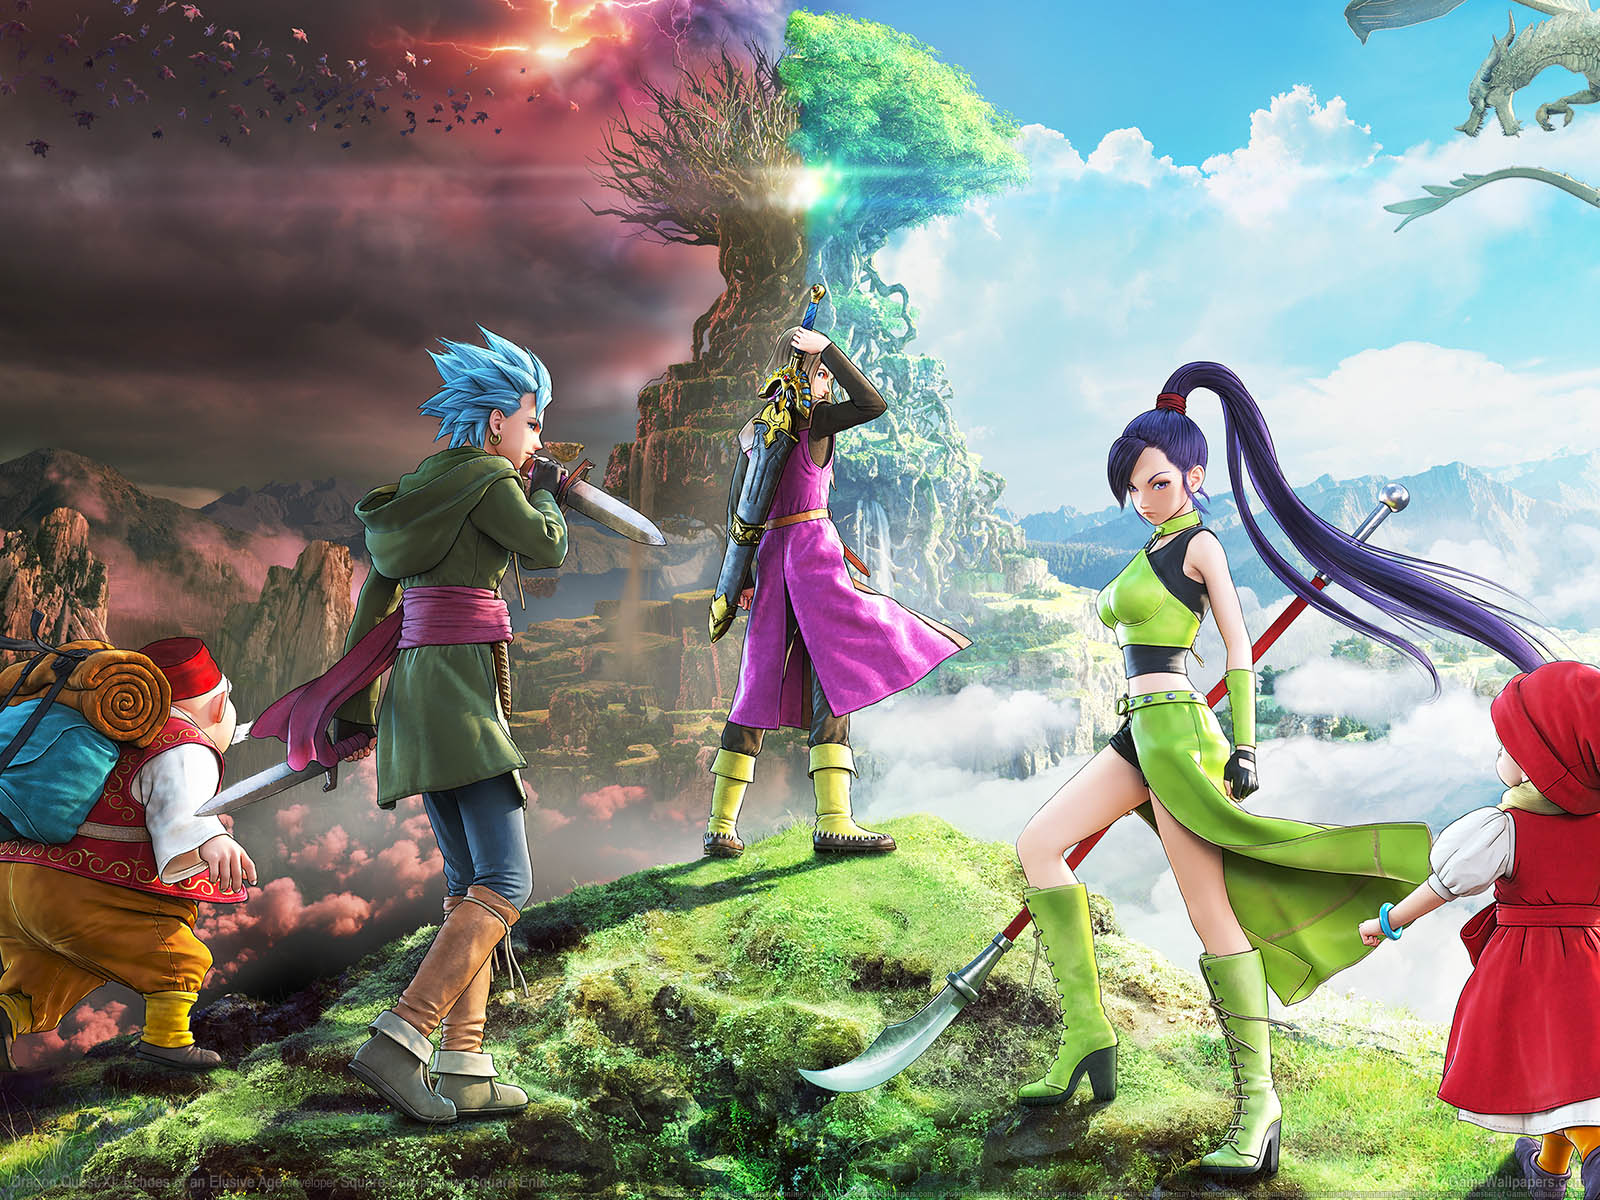 Dragon Quest XI: Echoes of an Elusive Ageνmmer=01 achtergrond  1600x1200